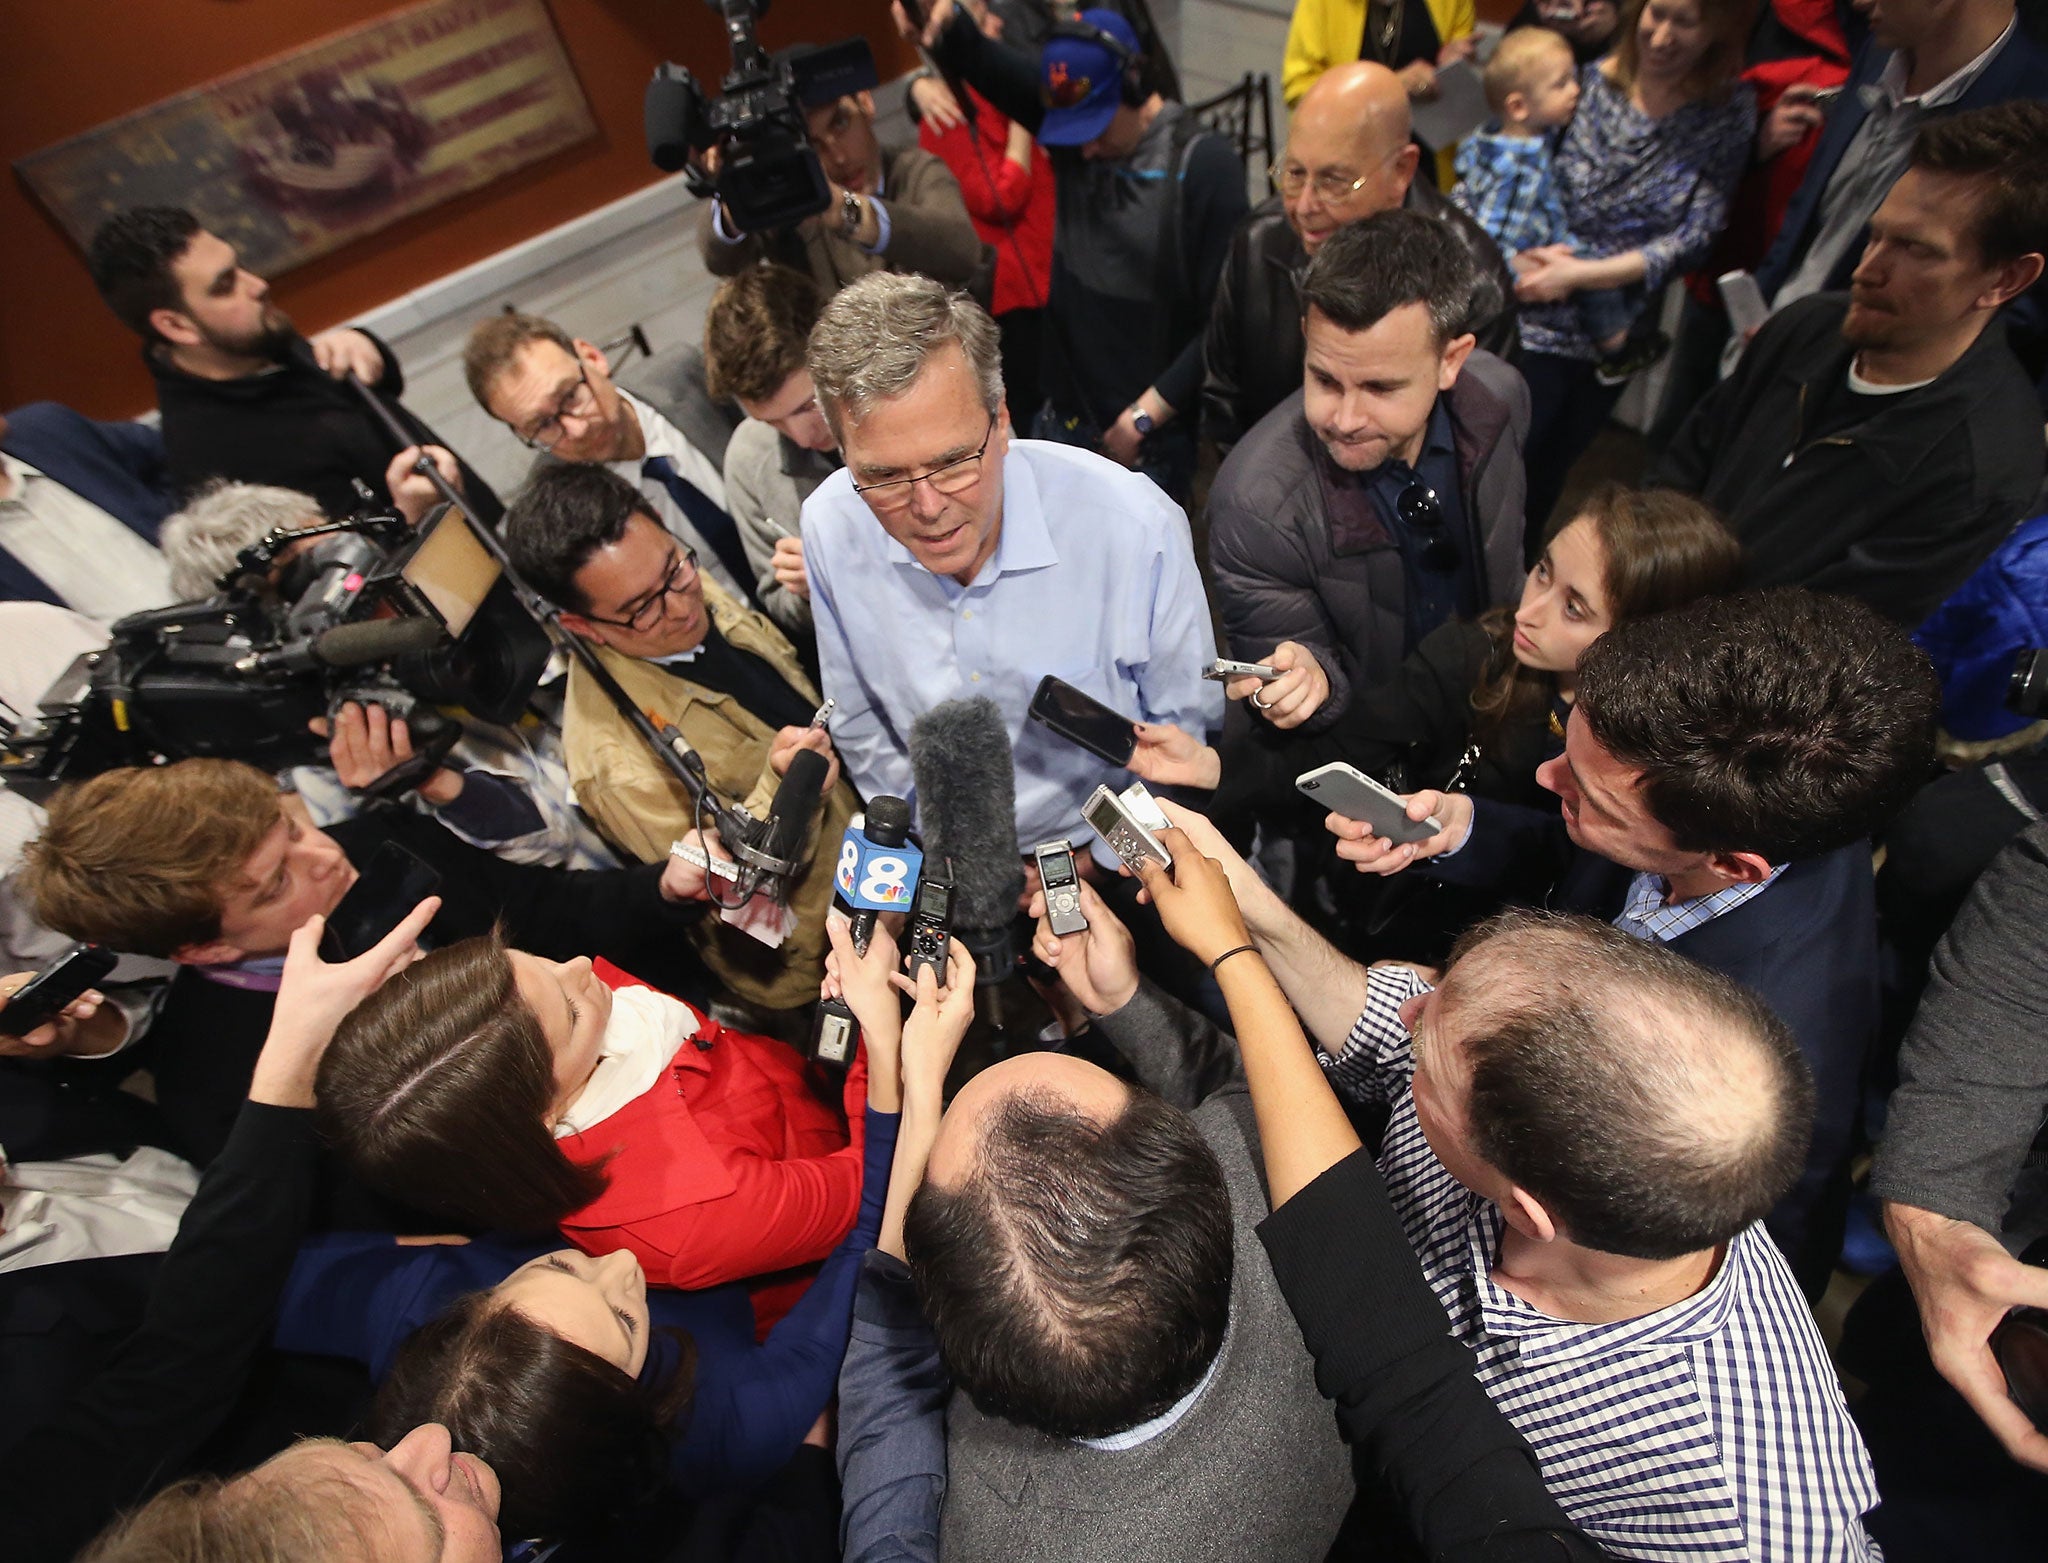 Jeb Bush in Iowa, whose party caucuses are traditionally a bellwether of the election